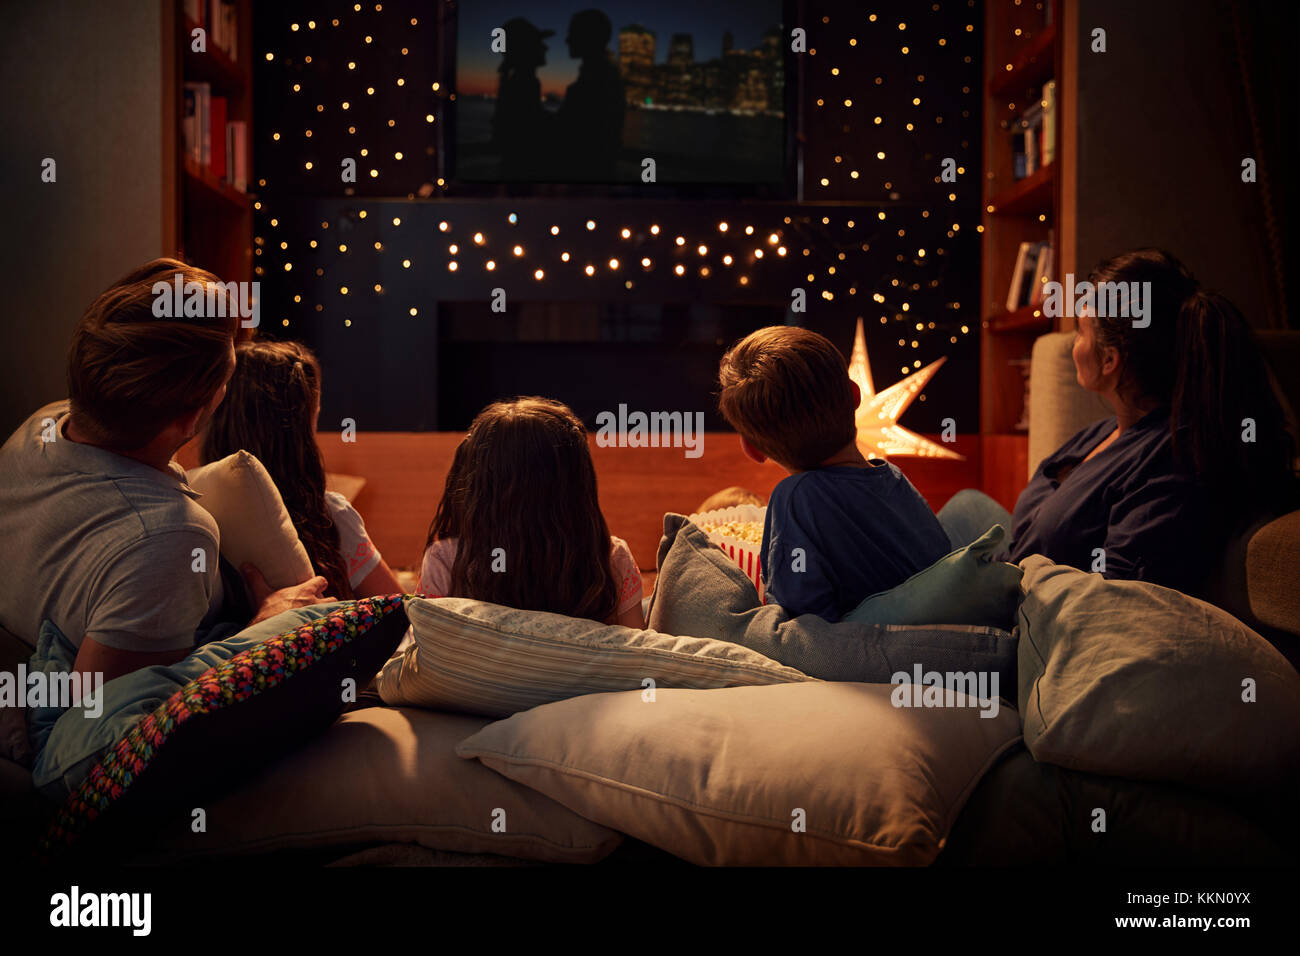 Family Enjoying Movie Night At Home Together Stock Photo